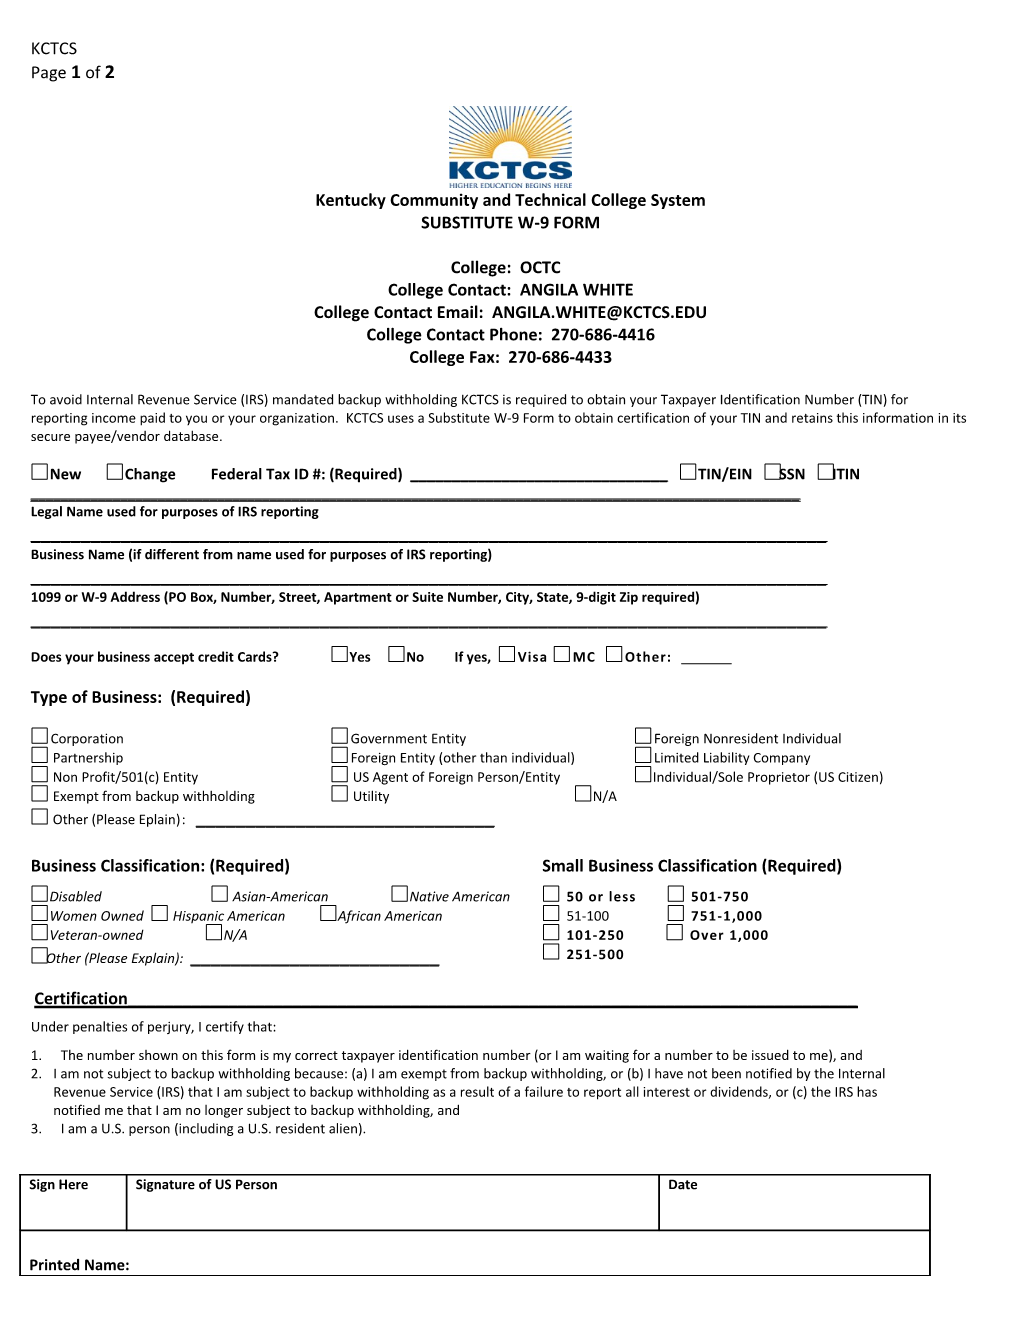 Kentucky Community and Technical College System SUBSTITUTE W-9 FORM